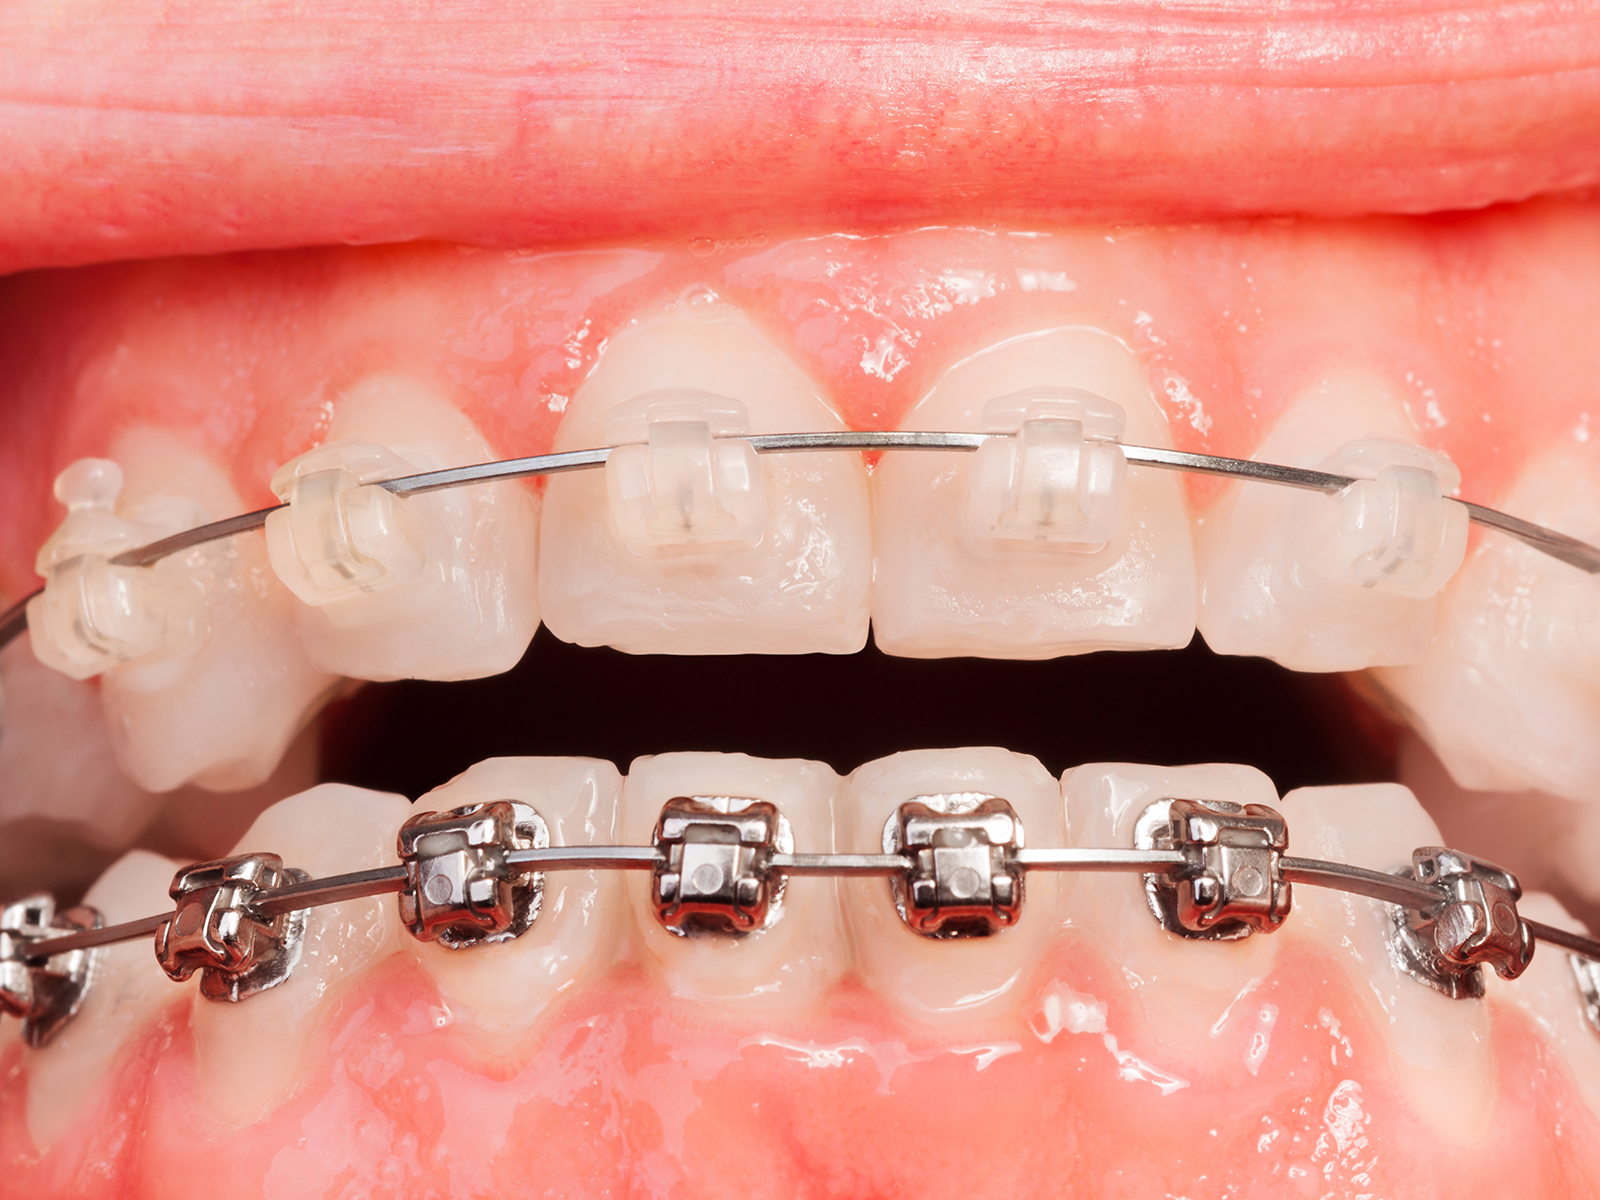 Clear Braces And Aligners: Benefits of Clear Braces - PerkinsOrtho